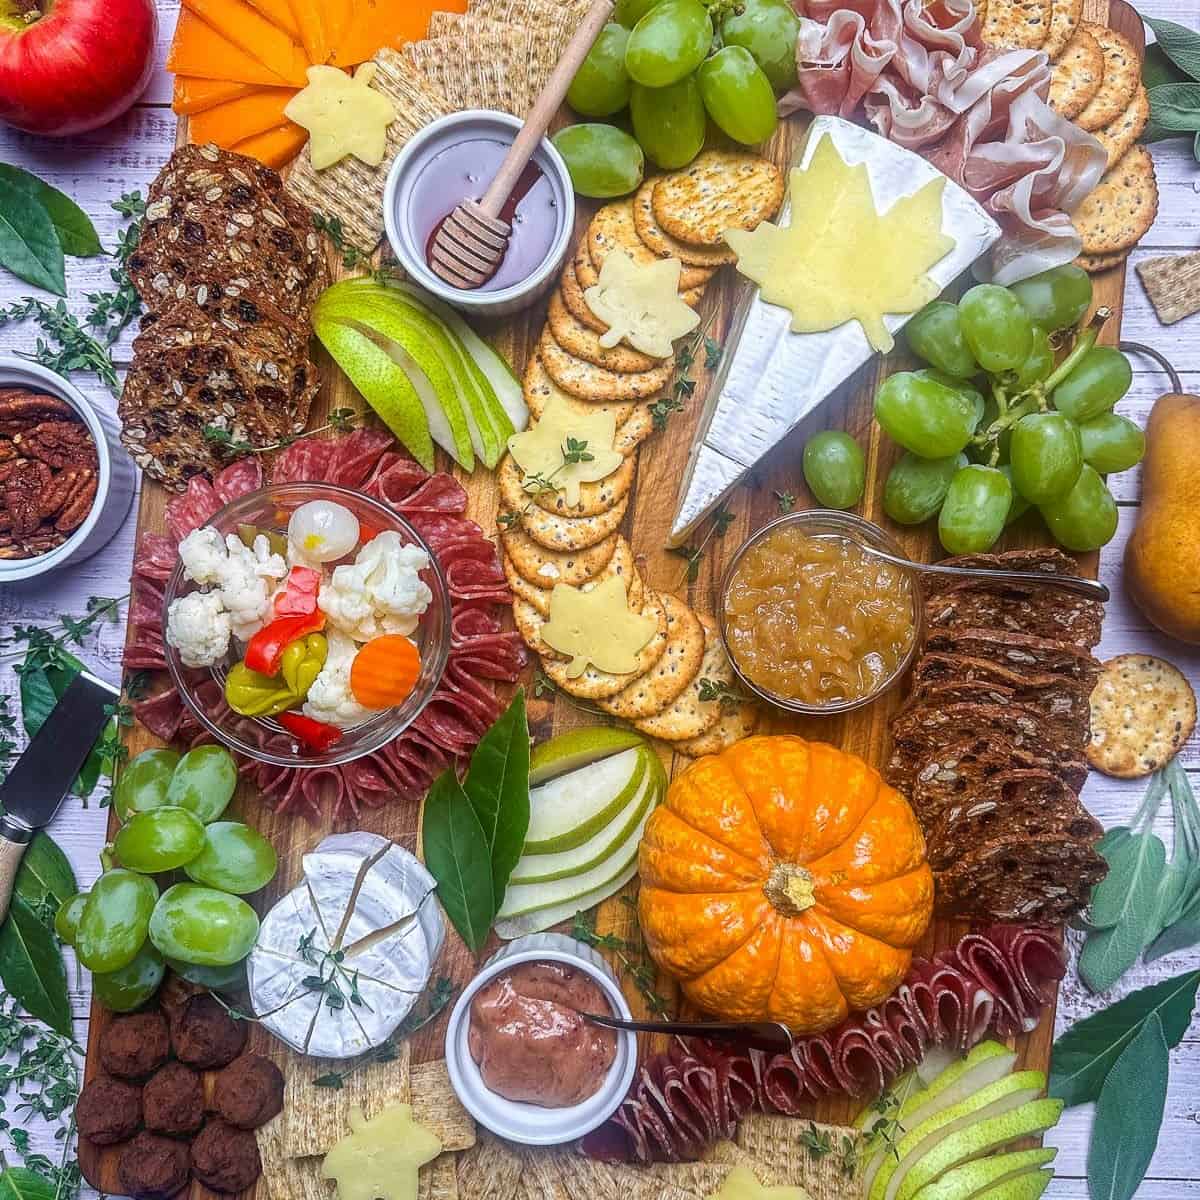 A fall appetizer board with fruits, meats, crackers and jams and jellies.